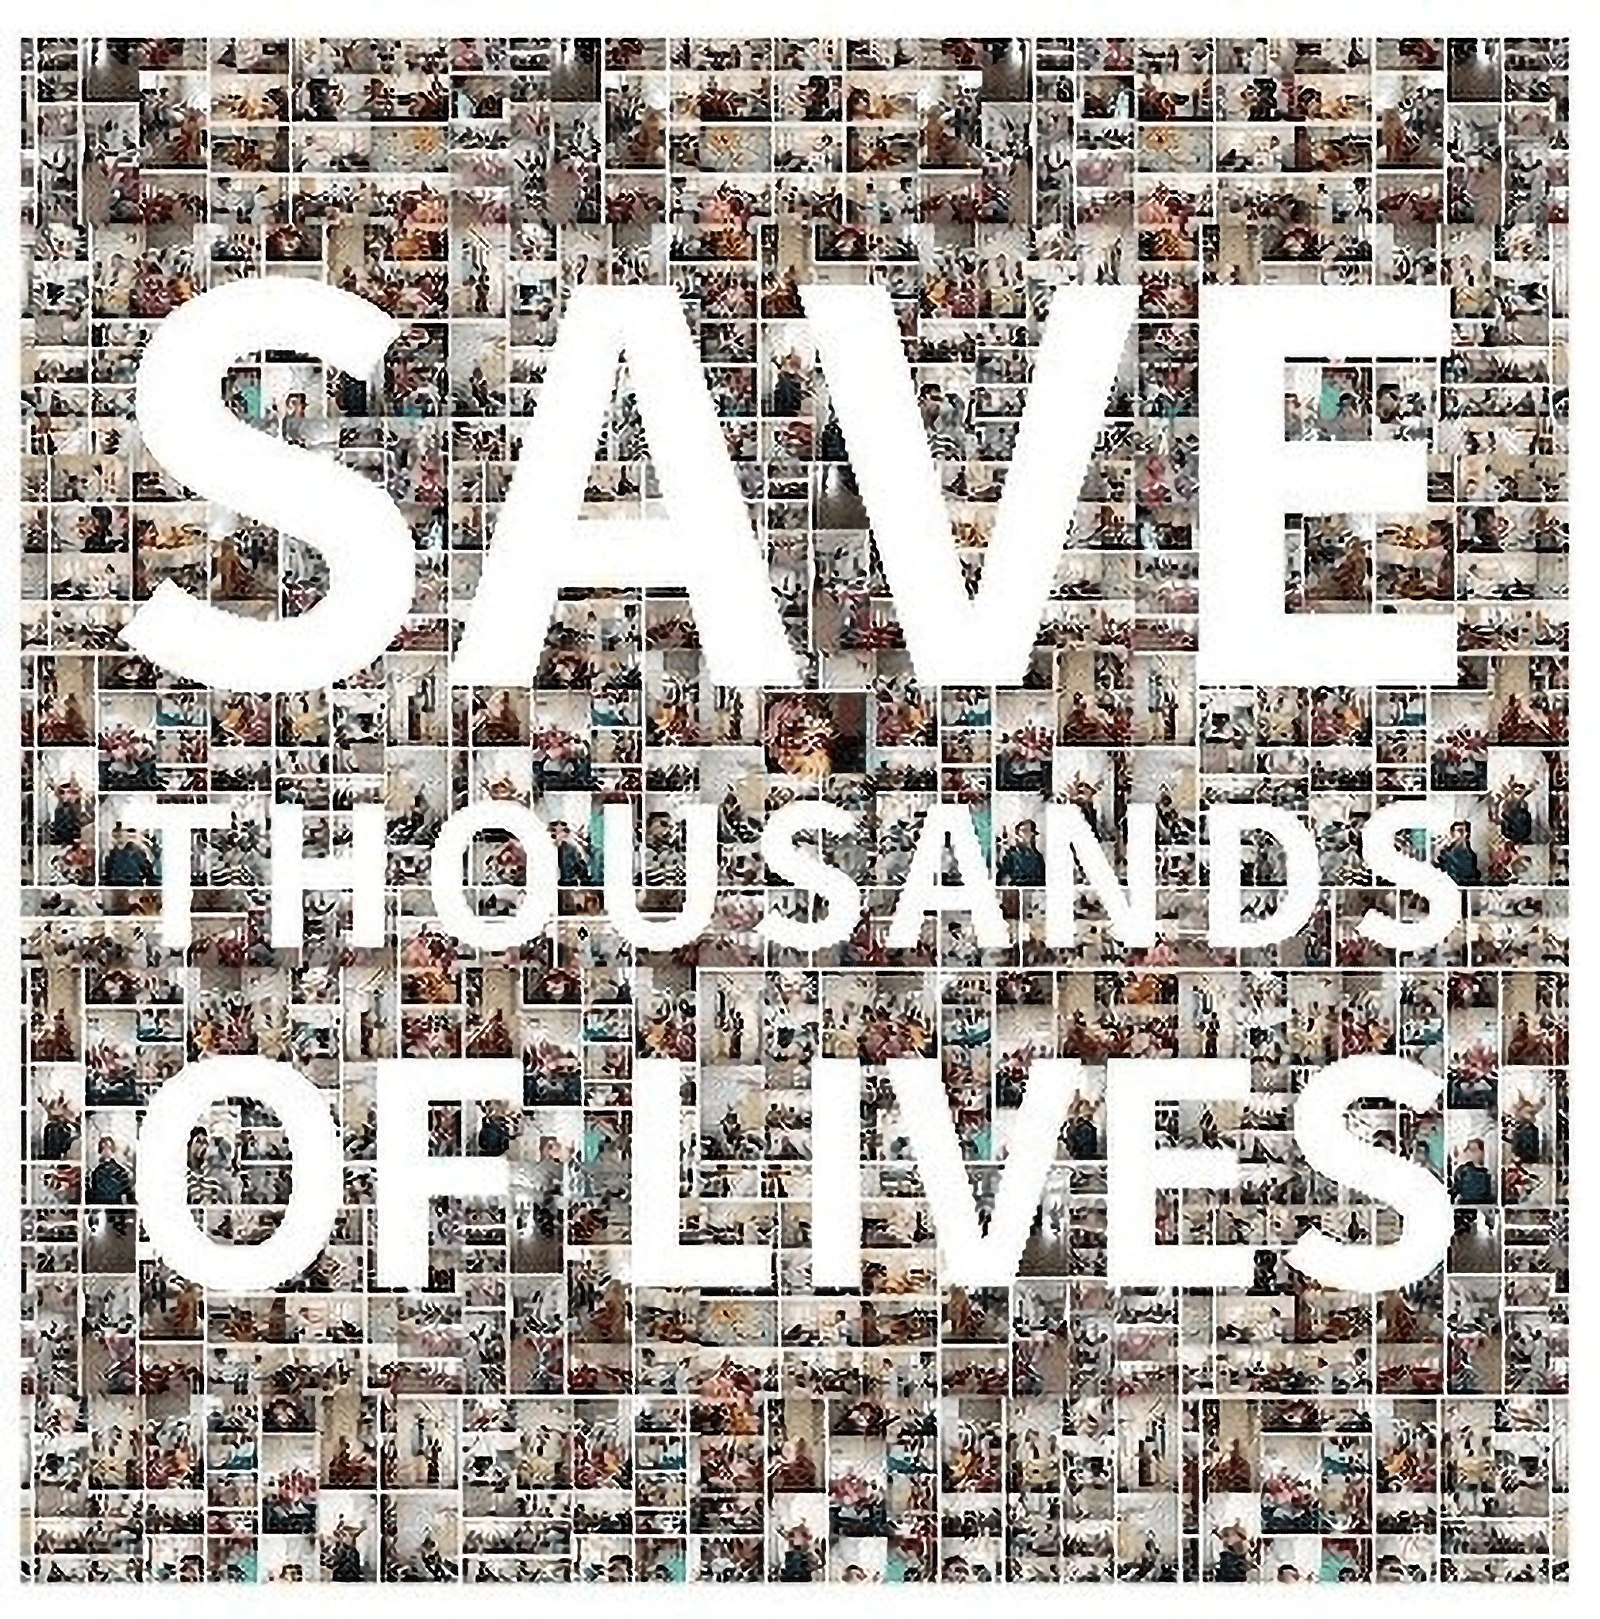 save-thousands-of-lives-min.png